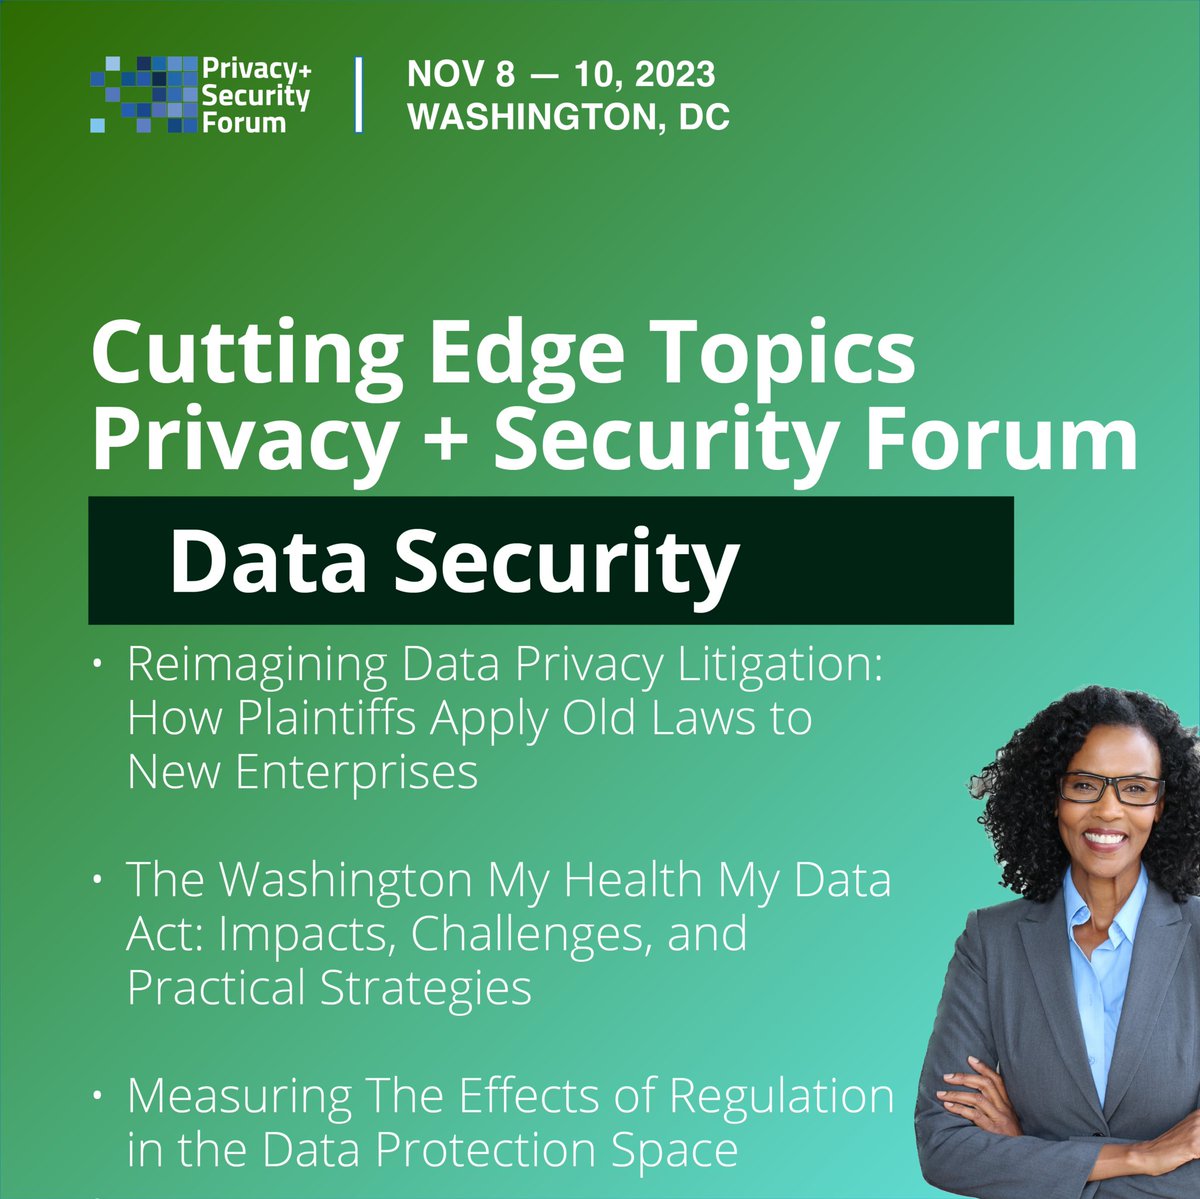 Join our sessions on Data Security at the Privacy + Security Forum, Nov 8-10, 2023. Register: bit.ly/3qjaMaB @privsecacademy #privsecforum #Data